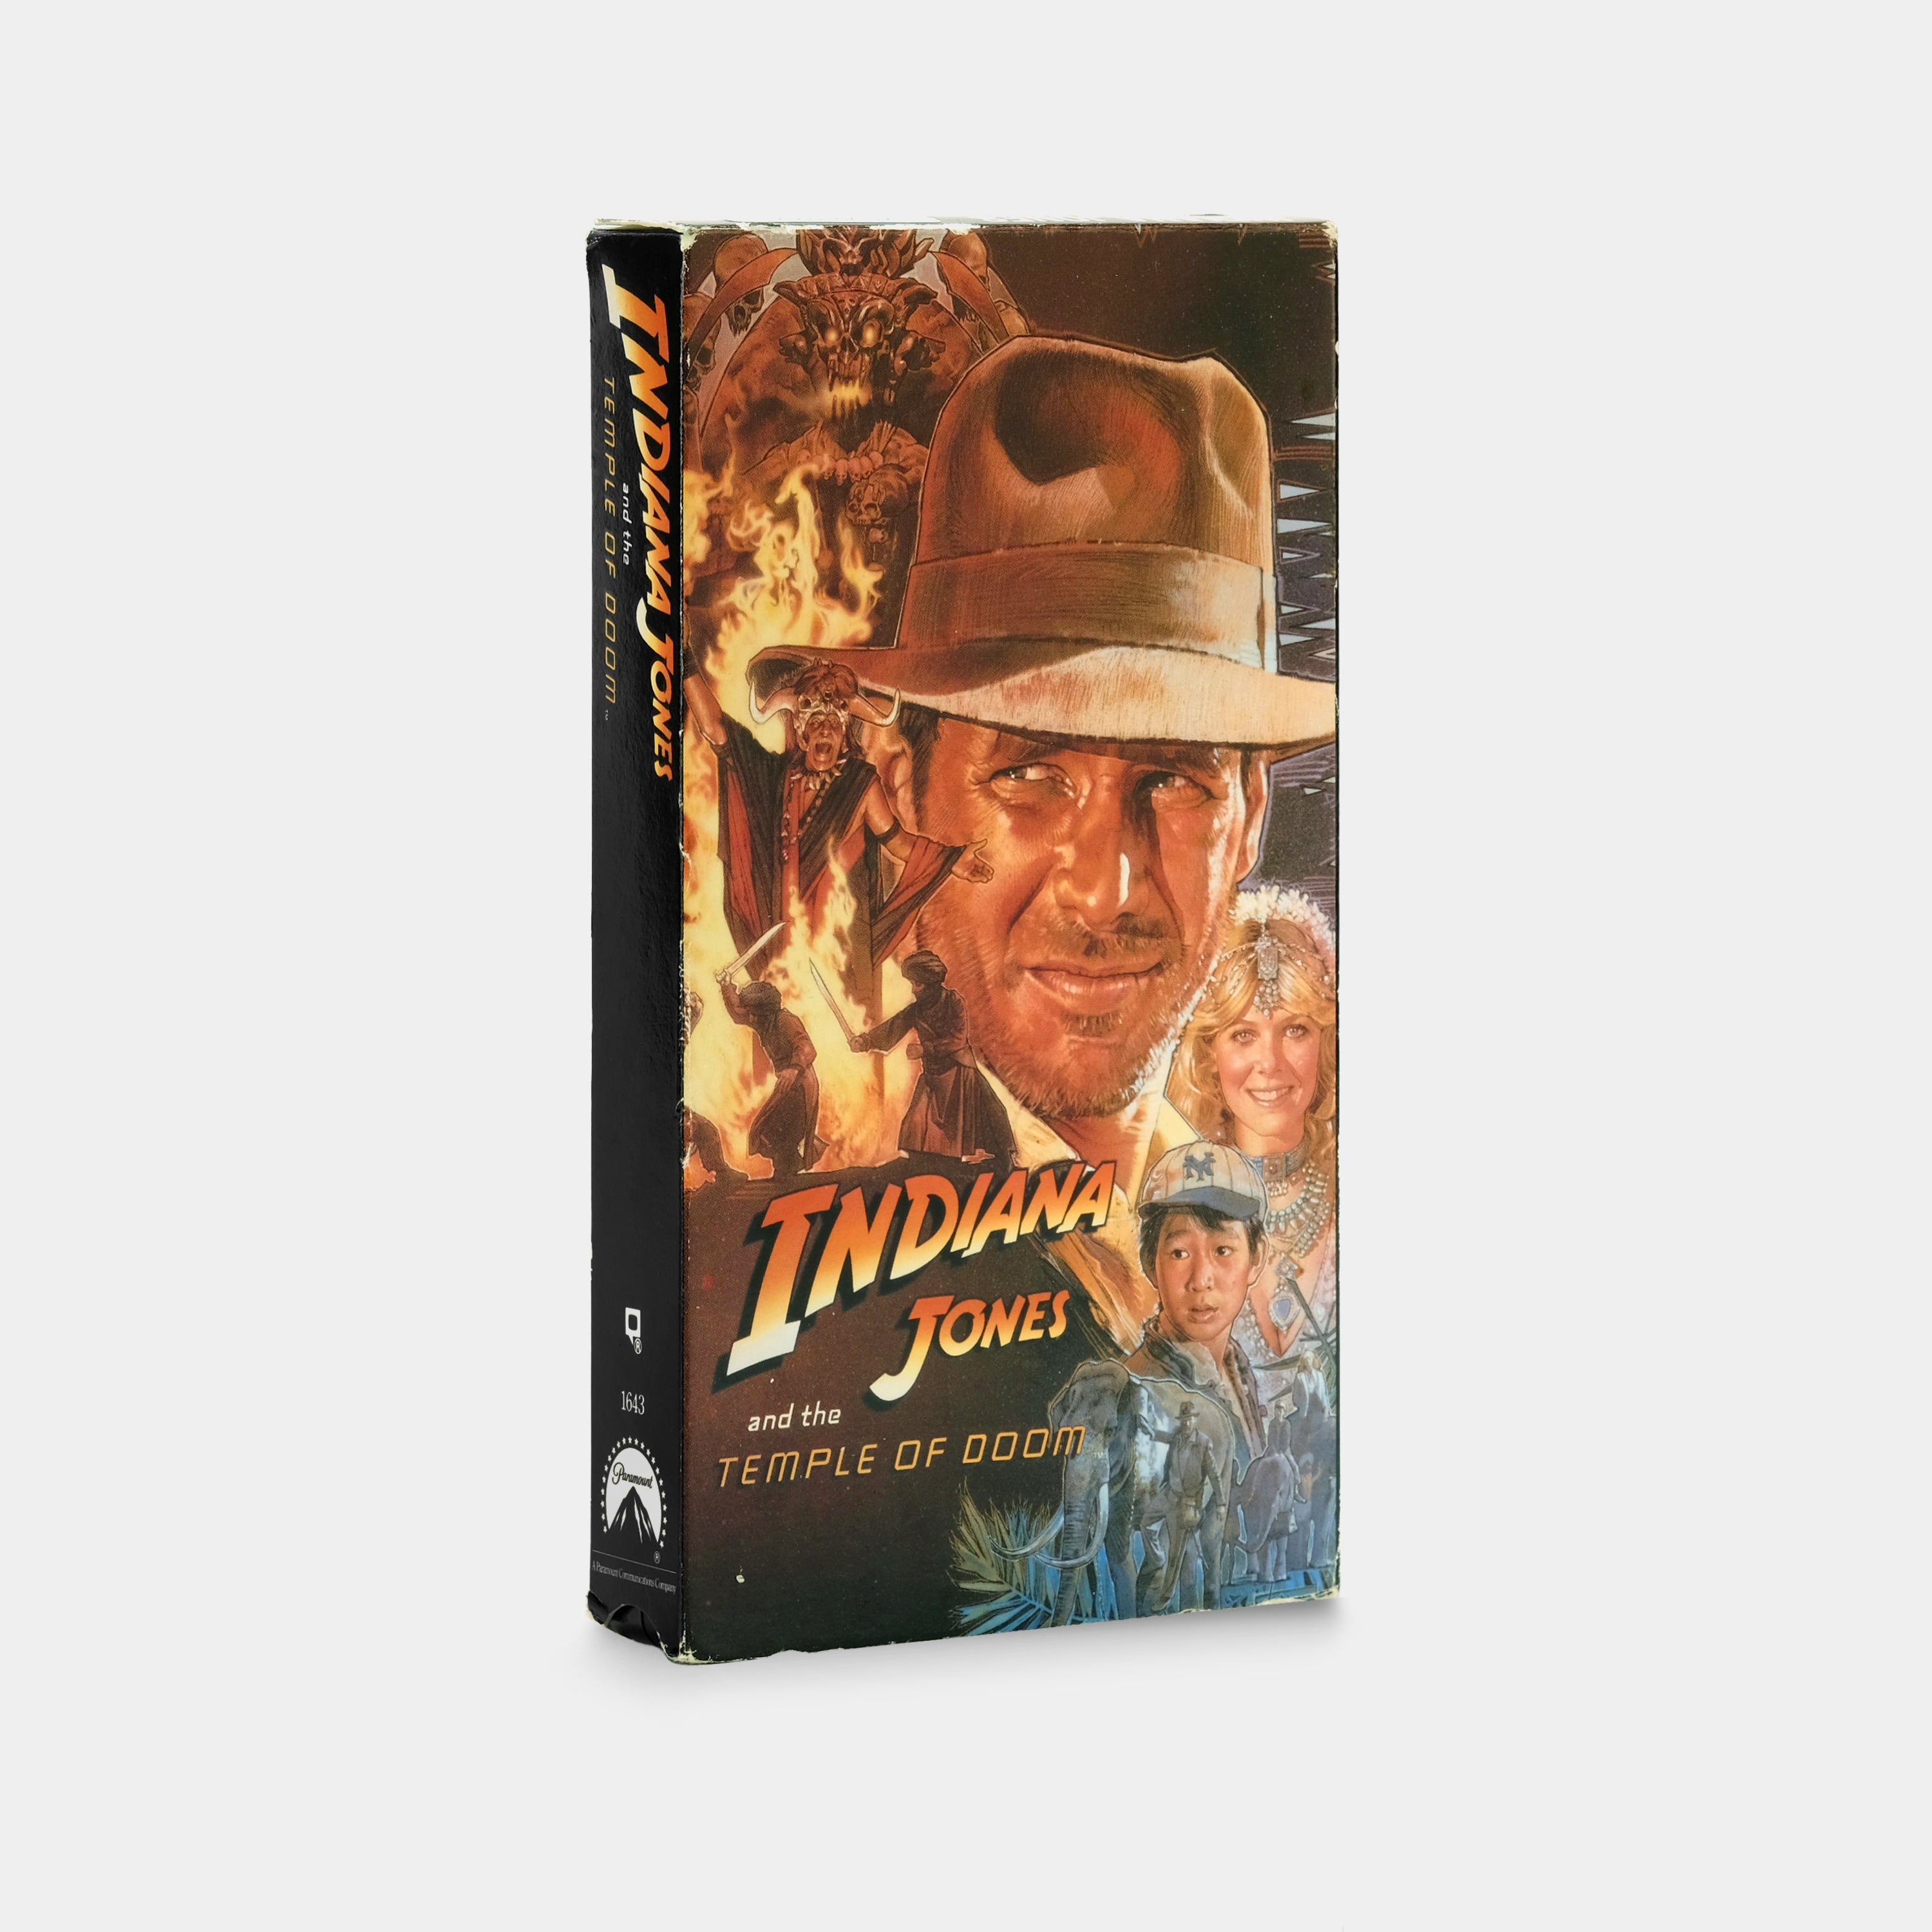 Indiana Jones and the Temple of Doom VHS Tape